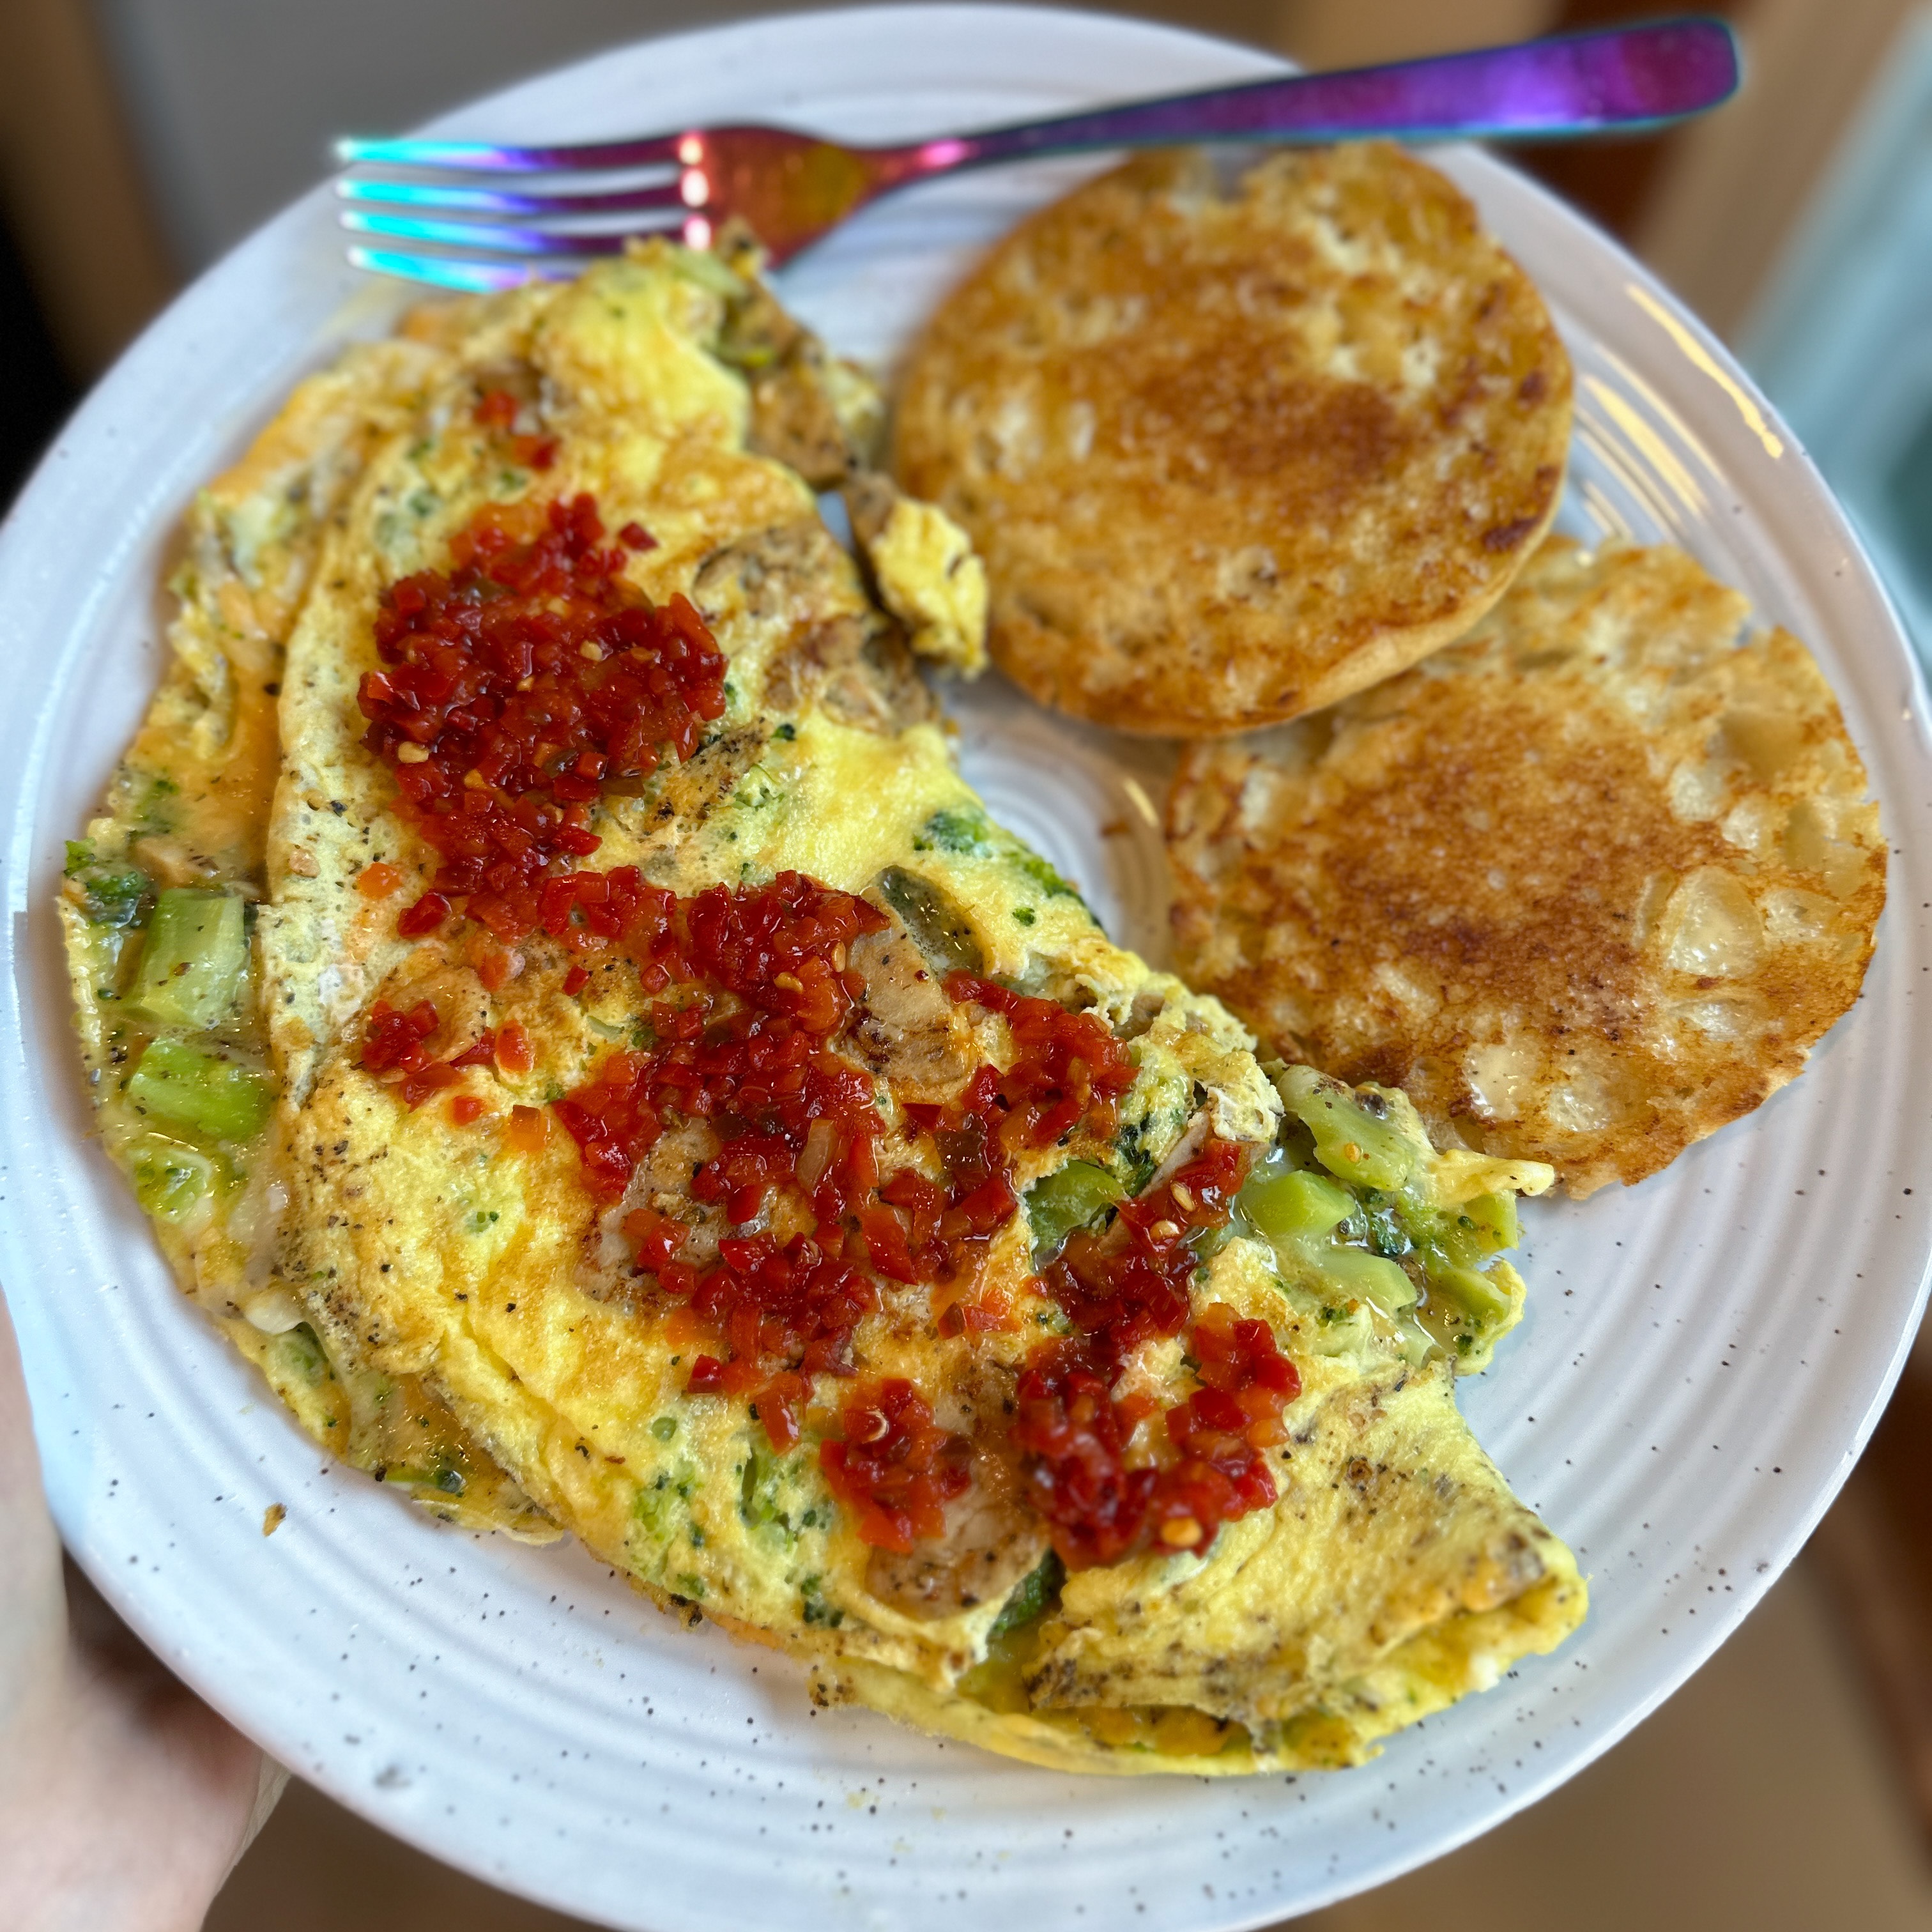 Sausage, Broccoli and Cheese Omelet